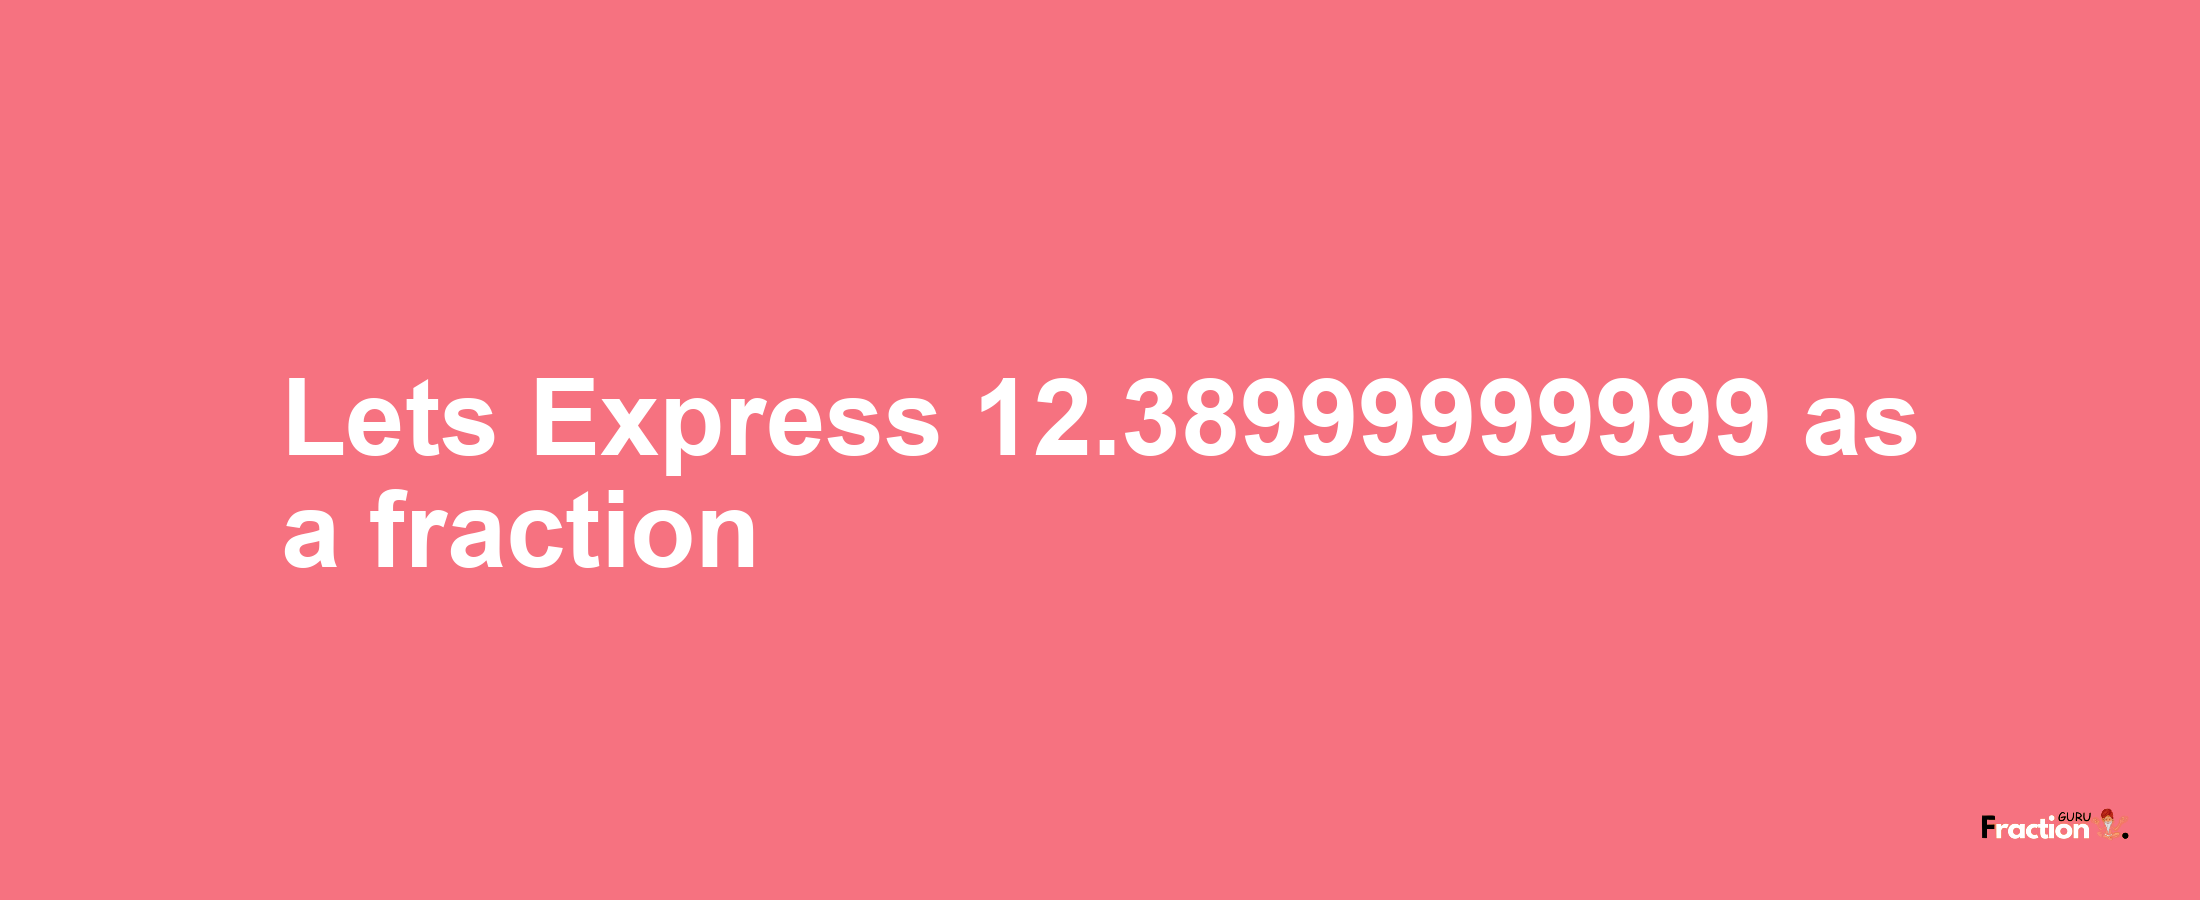 Lets Express 12.38999999999 as afraction